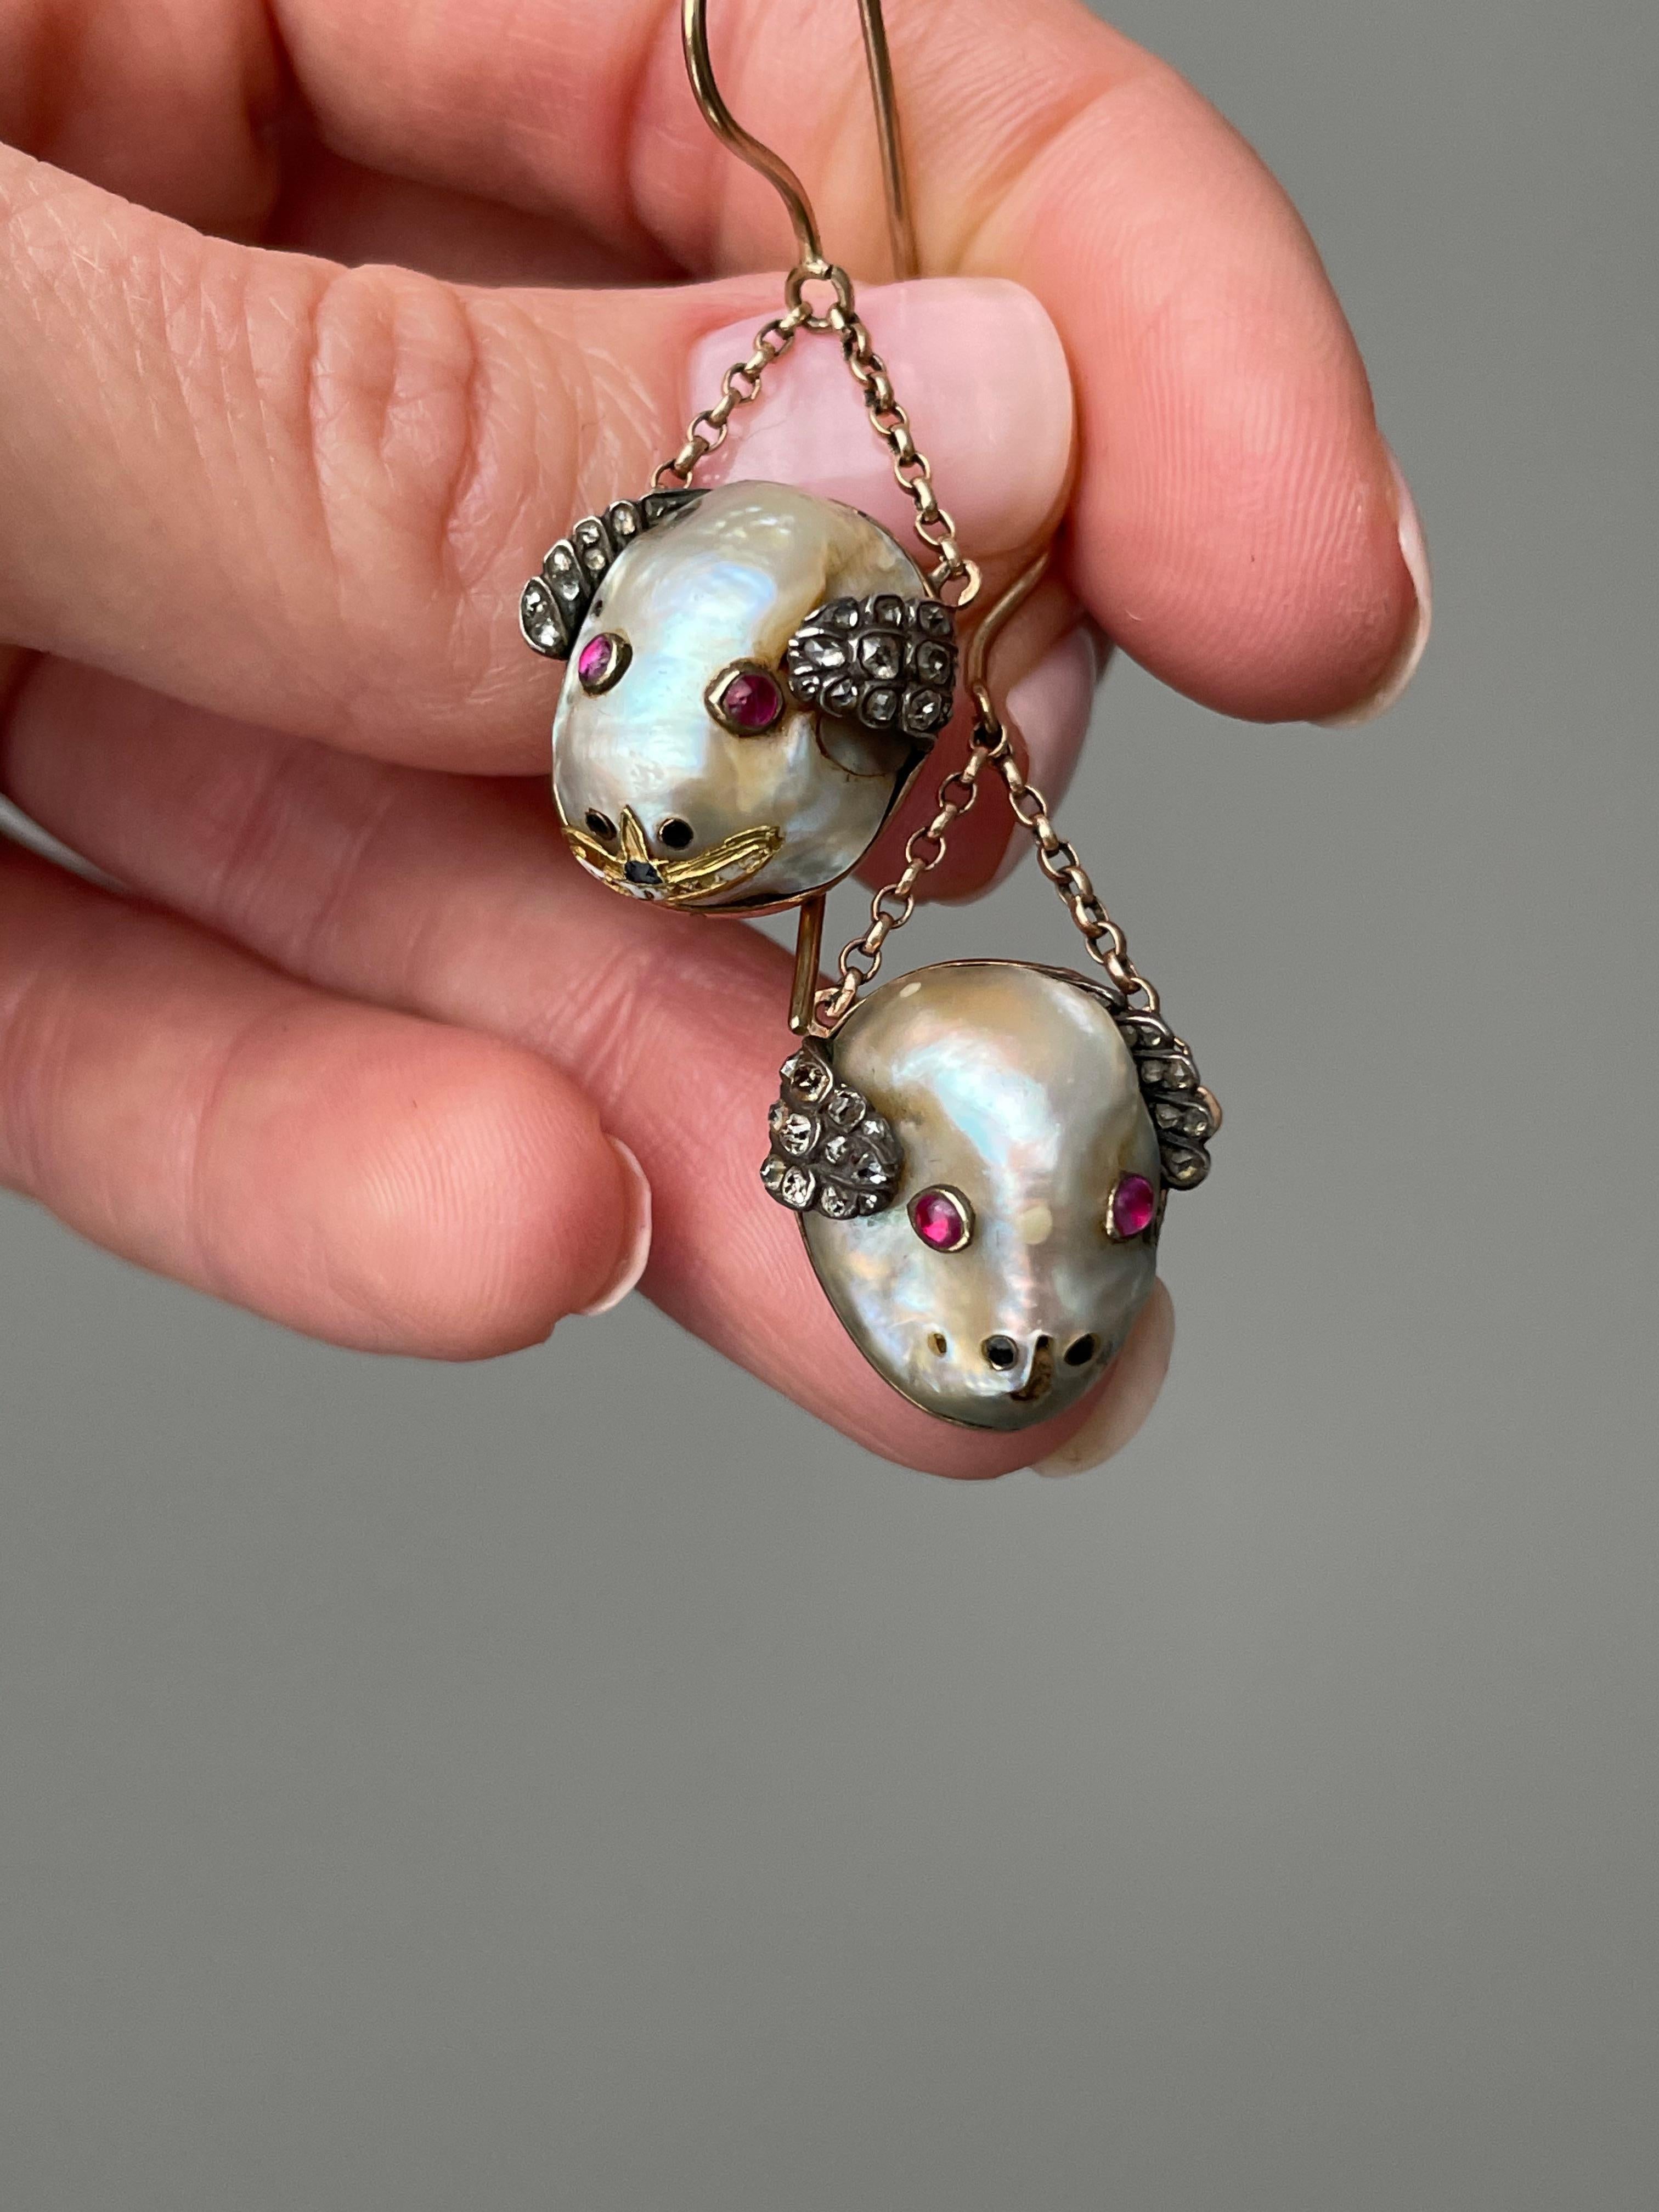 Antique 19th C Renaissance Revival Natural Baroque Pearl Mouse Earrings In Good Condition For Sale In Hummelstown, PA